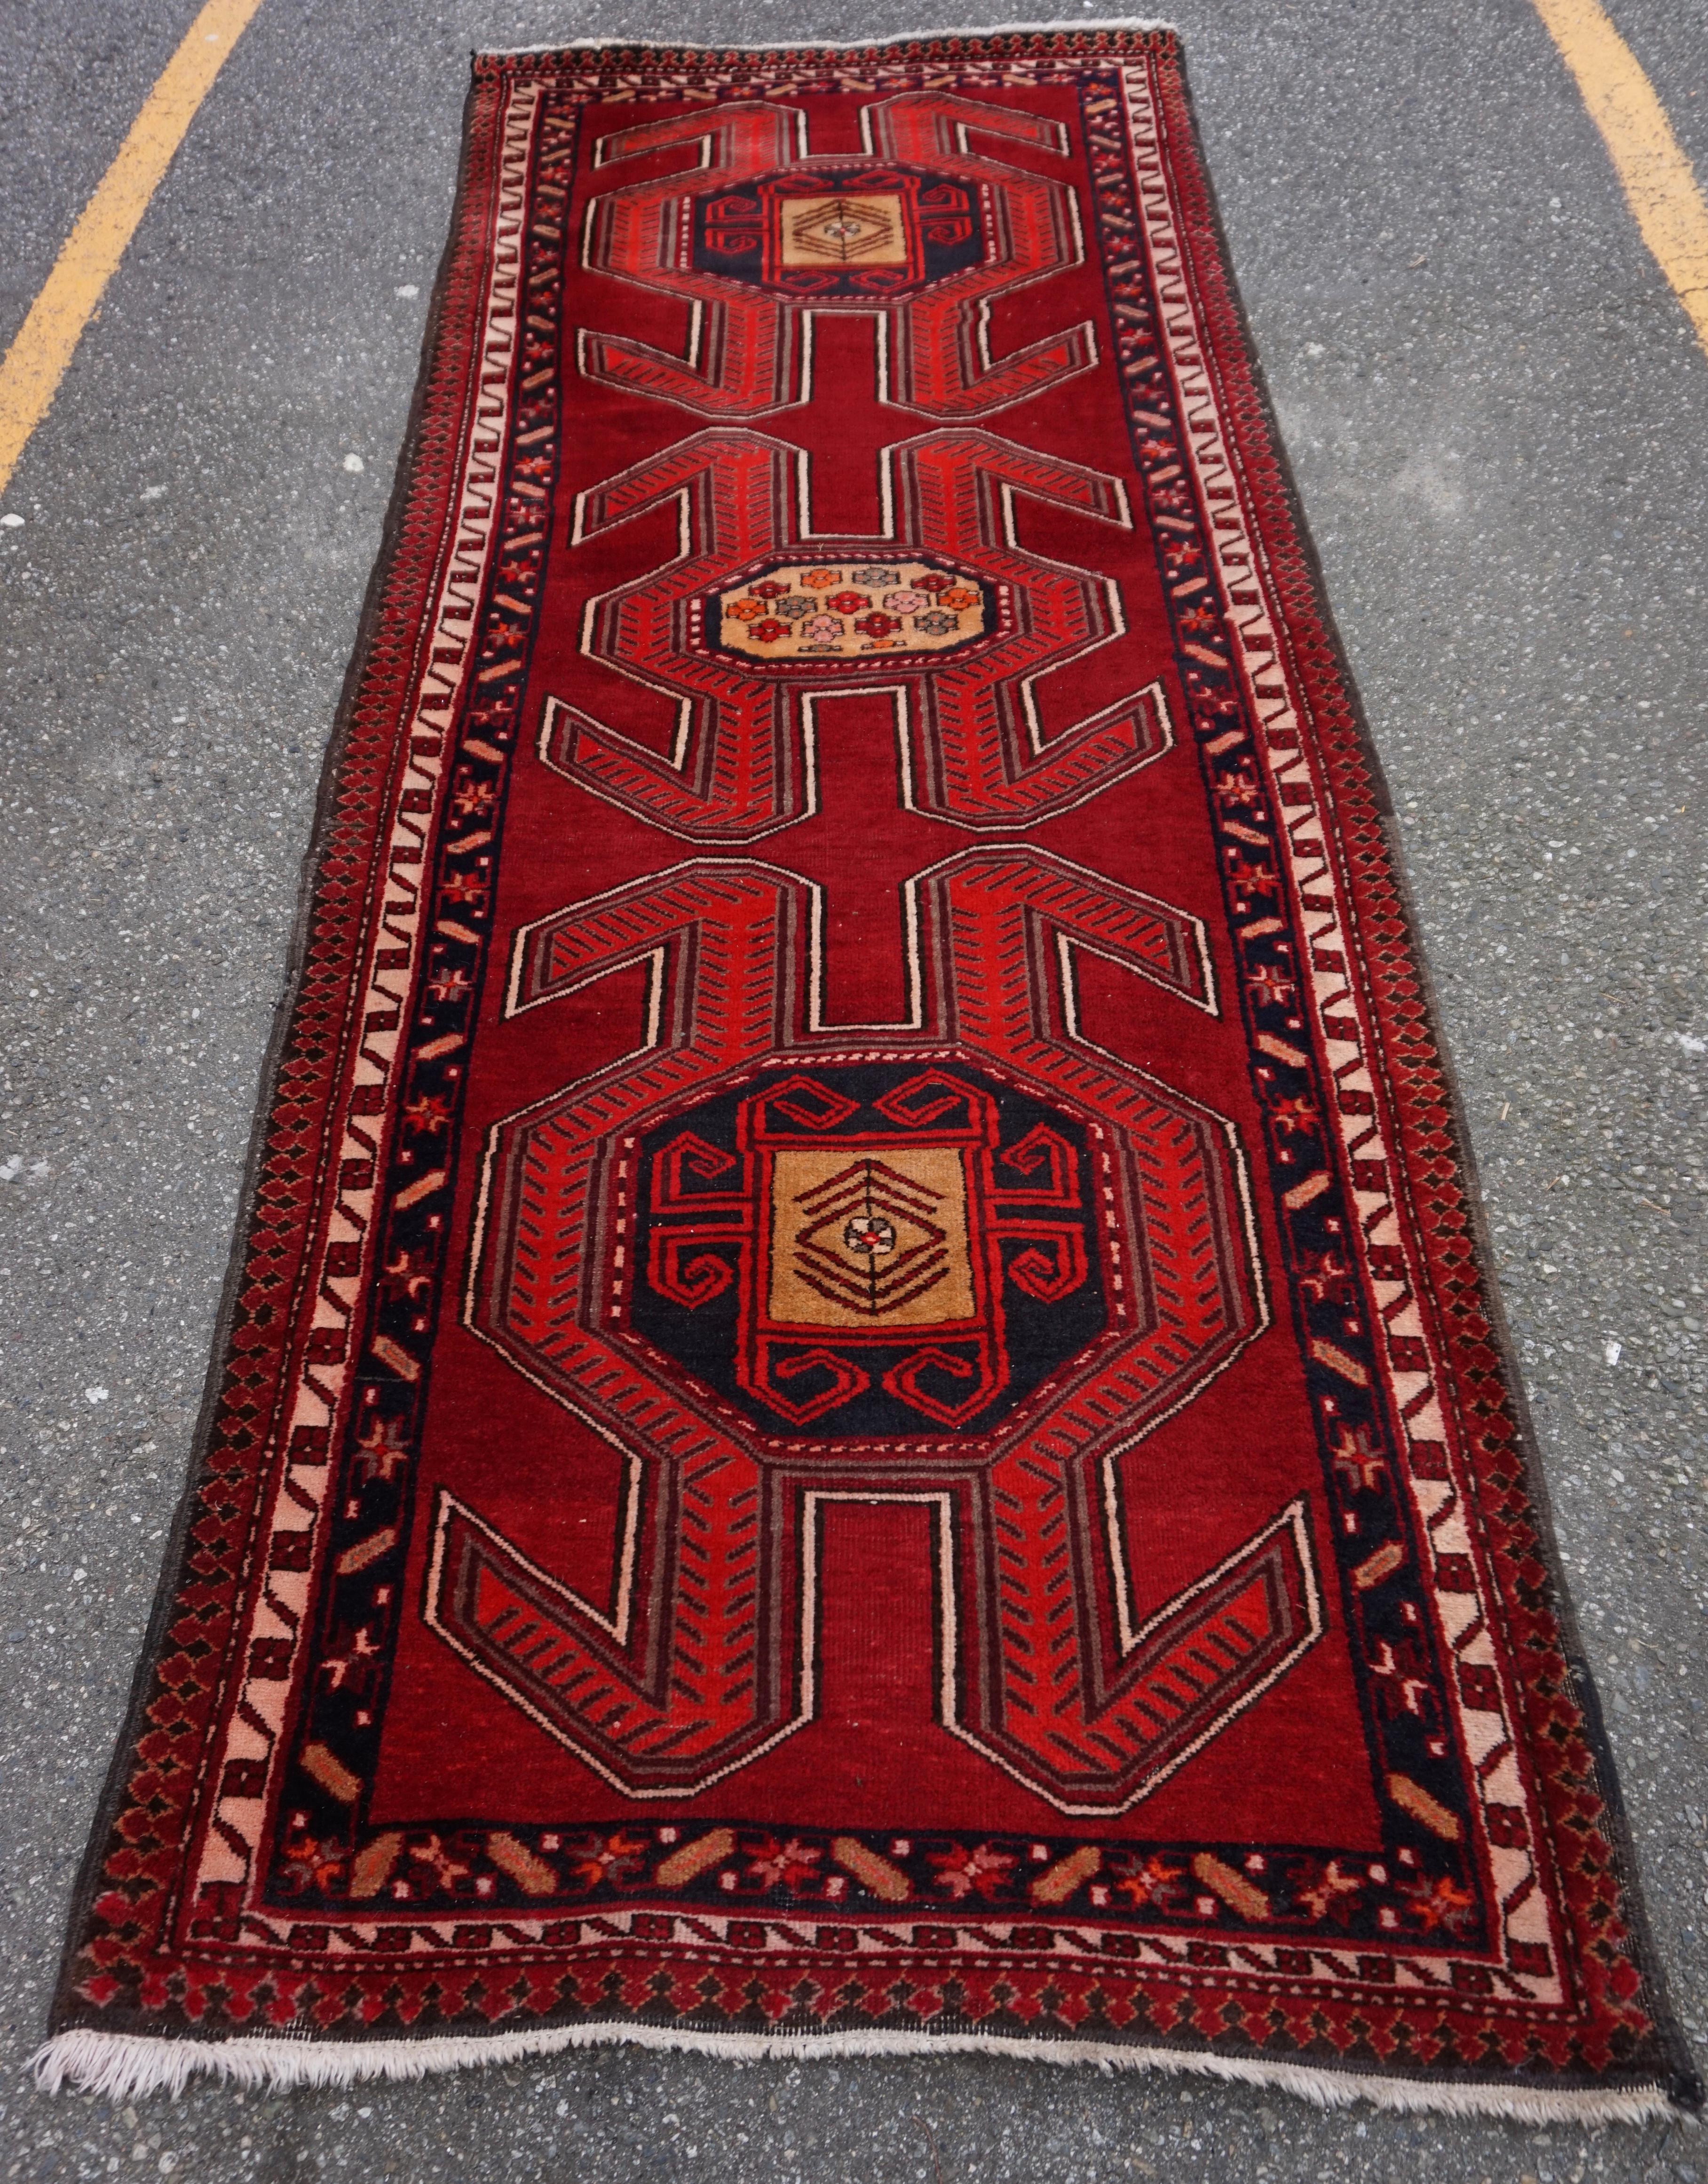 Circa 1940's 

Older Caucasus Tribal runner with vivid hues of reds and rusts. Overall good condition with minor wear near edges as shown. This rug is vibrant and has flaming shades and bold design and much life to offer.